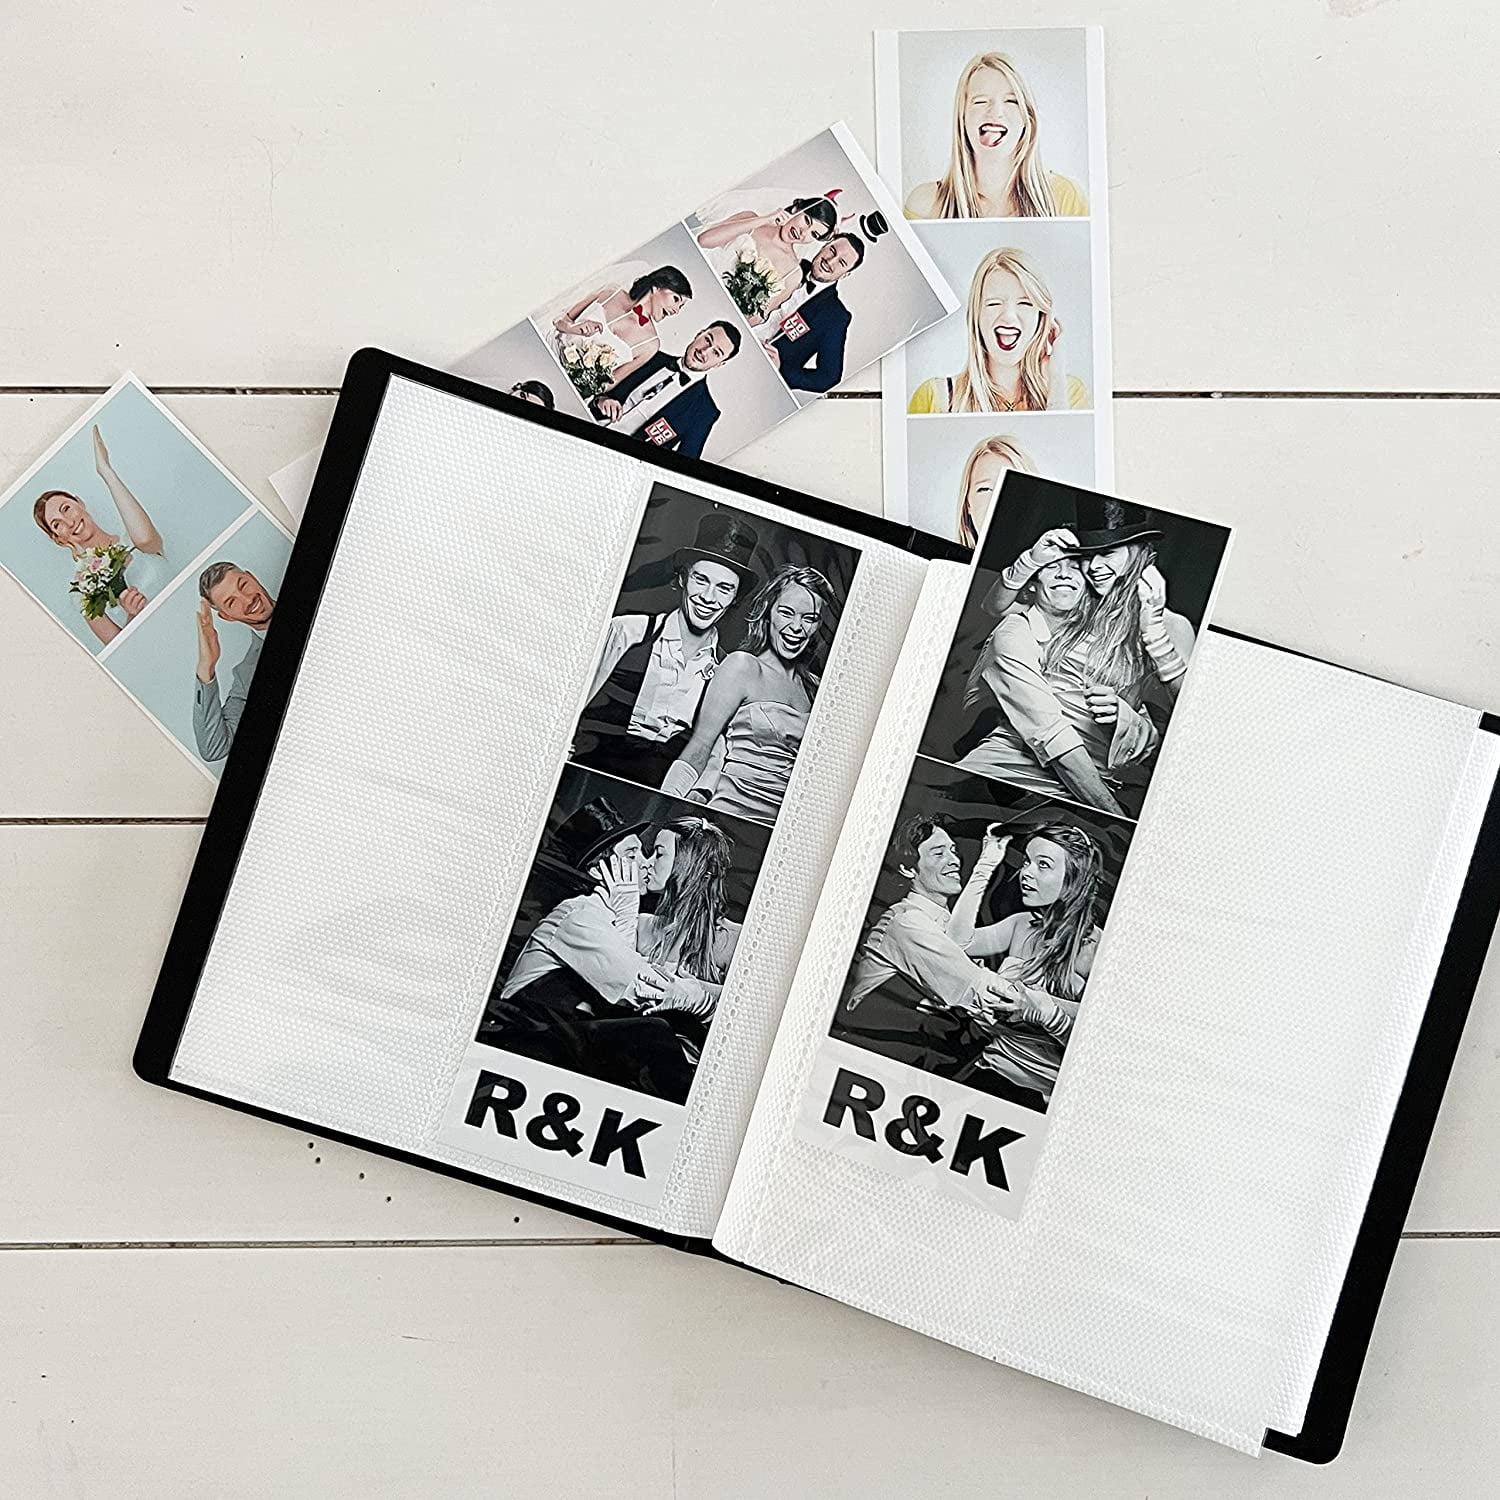  Photo Booth Photo Album For Photobooth Strips - Party Or  Wedding Favors - 20 Clear Sleeves - Fits 40 Slide In Photos Photobooth -  Pack of 5 or 10 (PACK OF 10, MINT) : Home & Kitchen